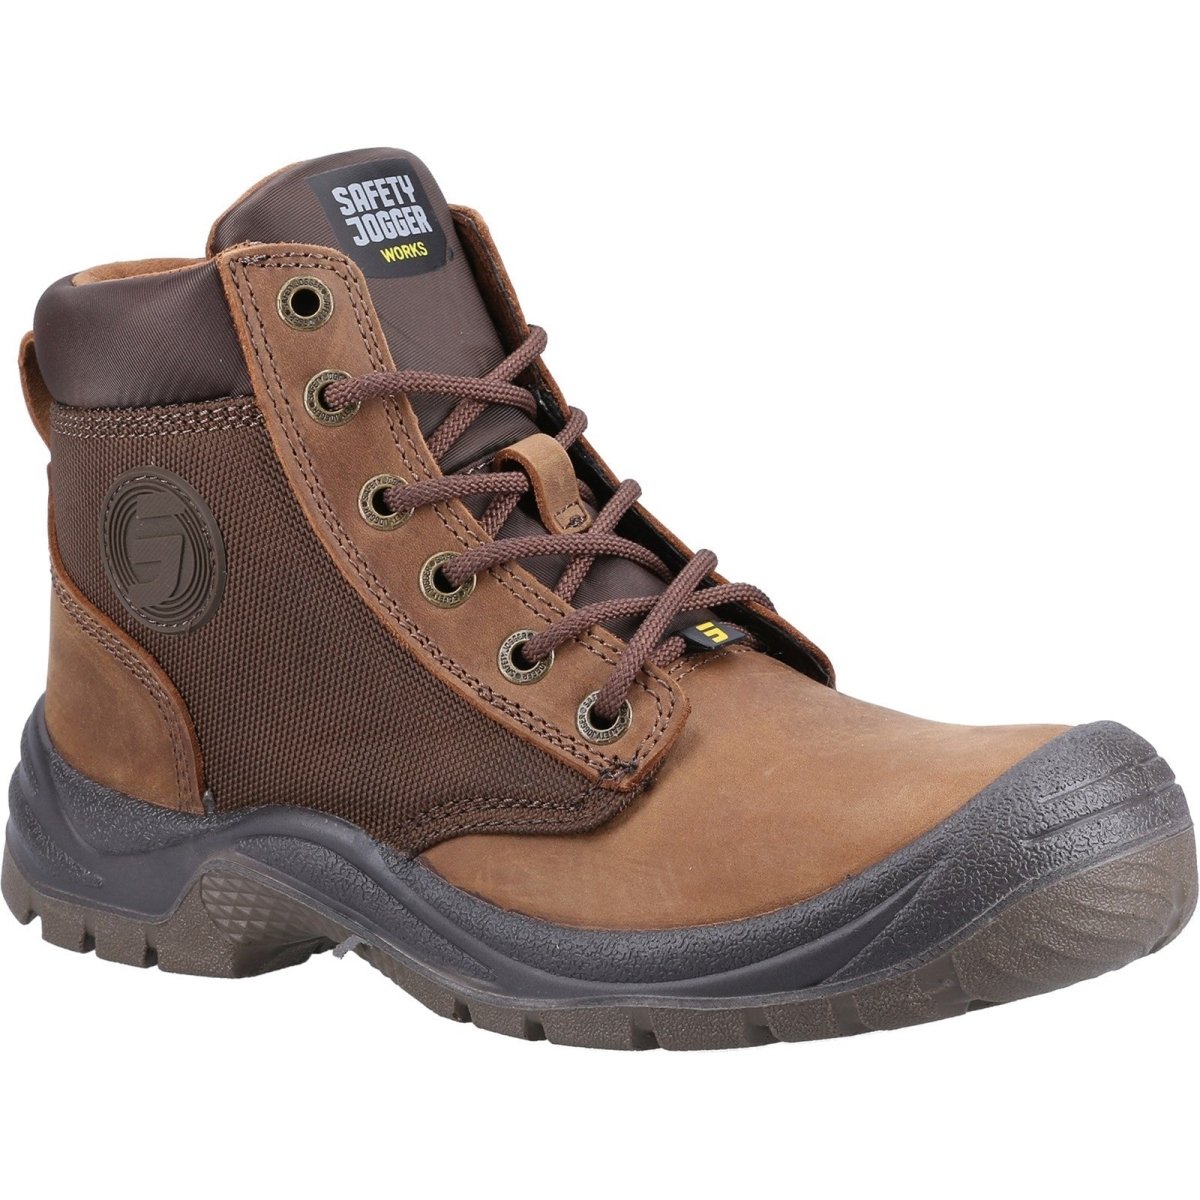 Safety Jogger Dakar S3 Steel Toe & Midsole Mens Safety Boots - Shoe Store Direct